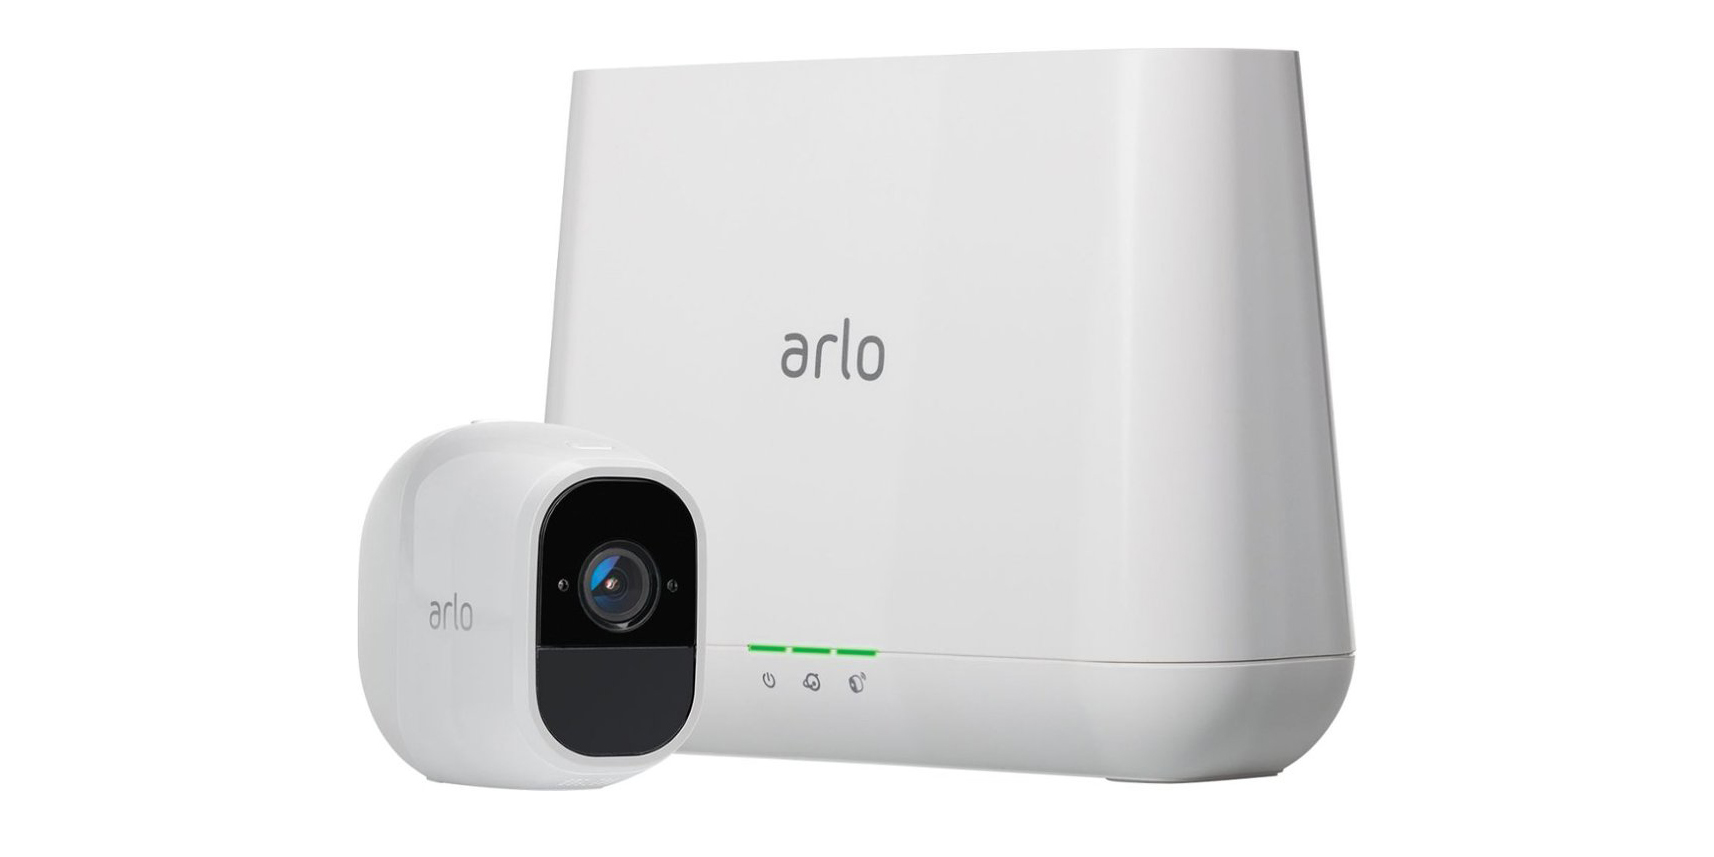 Add an Arlo Pro 2 Security System w/ FREE cloud storage to your home for 200 (Reg. 280) 9to5Toys